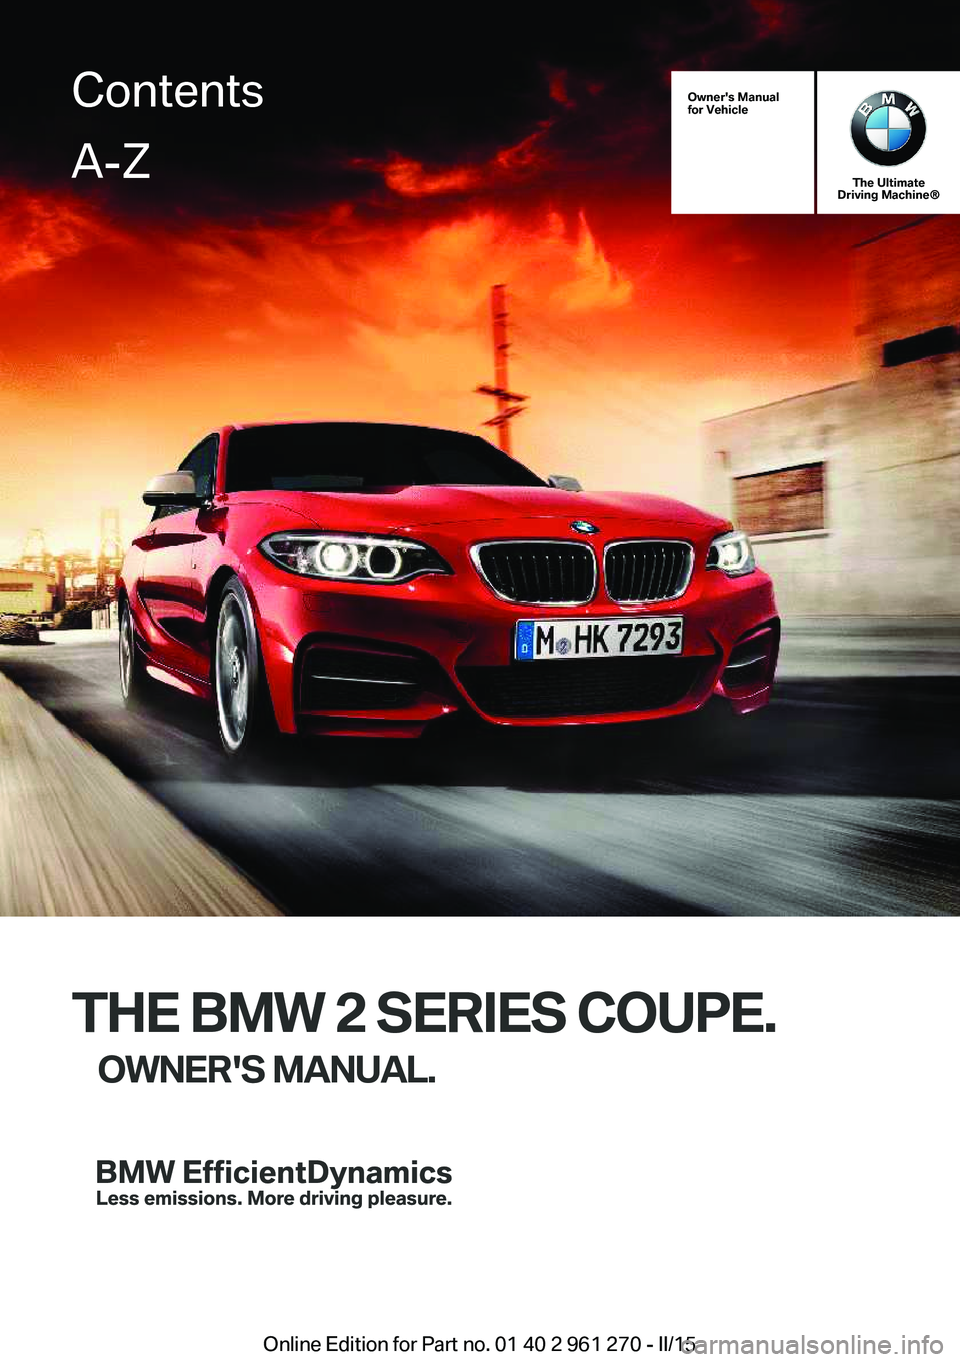 BMW 228I 2015  Owners Manual Owner's Manual
for Vehicle
The Ultimate
Driving Machine®
THE BMW 2 SERIES COUPE.
OWNER'S MANUAL.
ContentsA-Z
Online Edition for Part no. 01 40 2 961 270 - II/15   